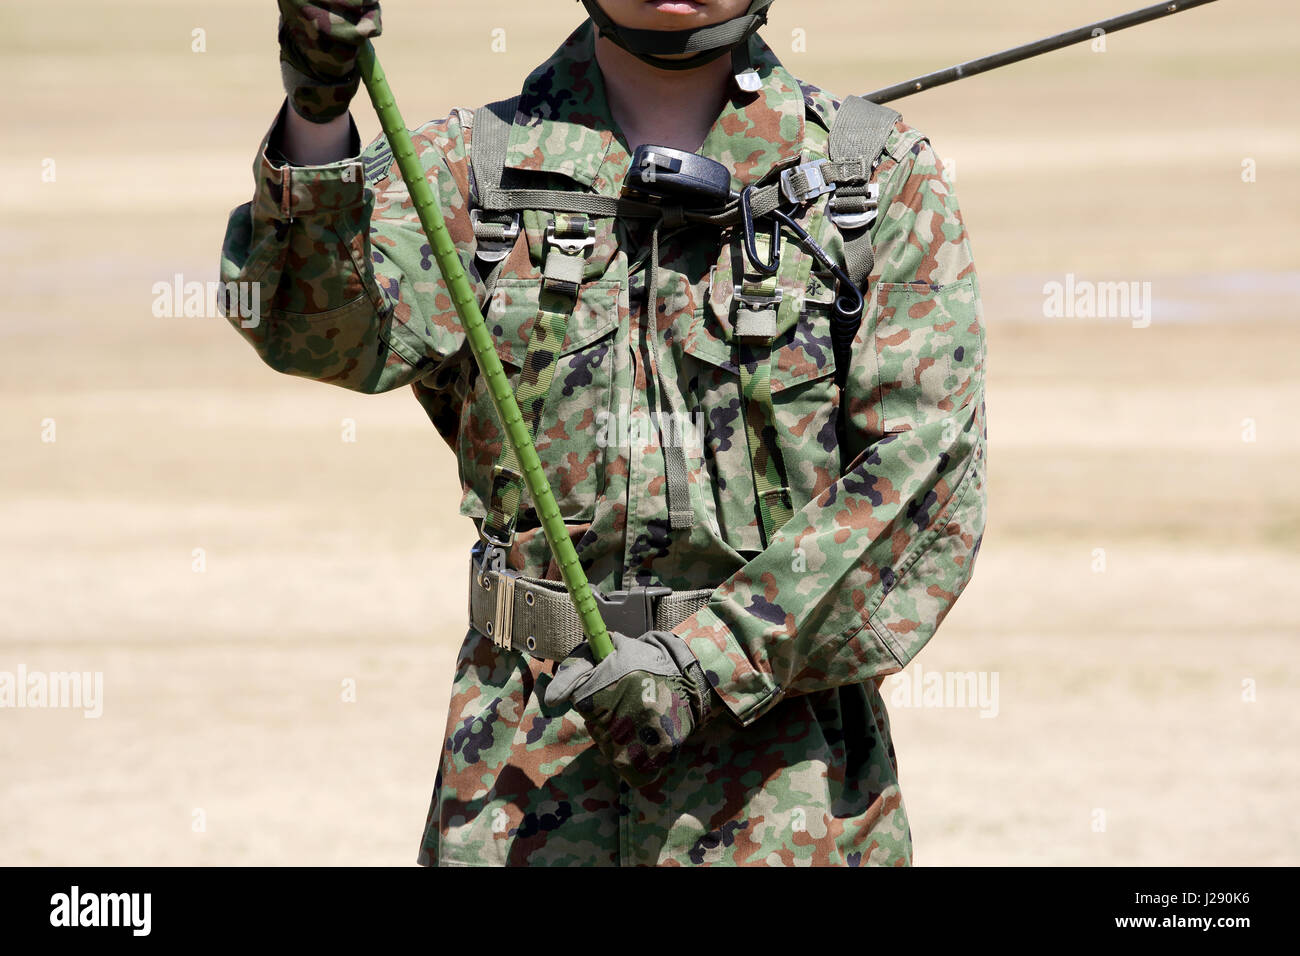 Japanese soldier with military camouflage uniform Stock Photo